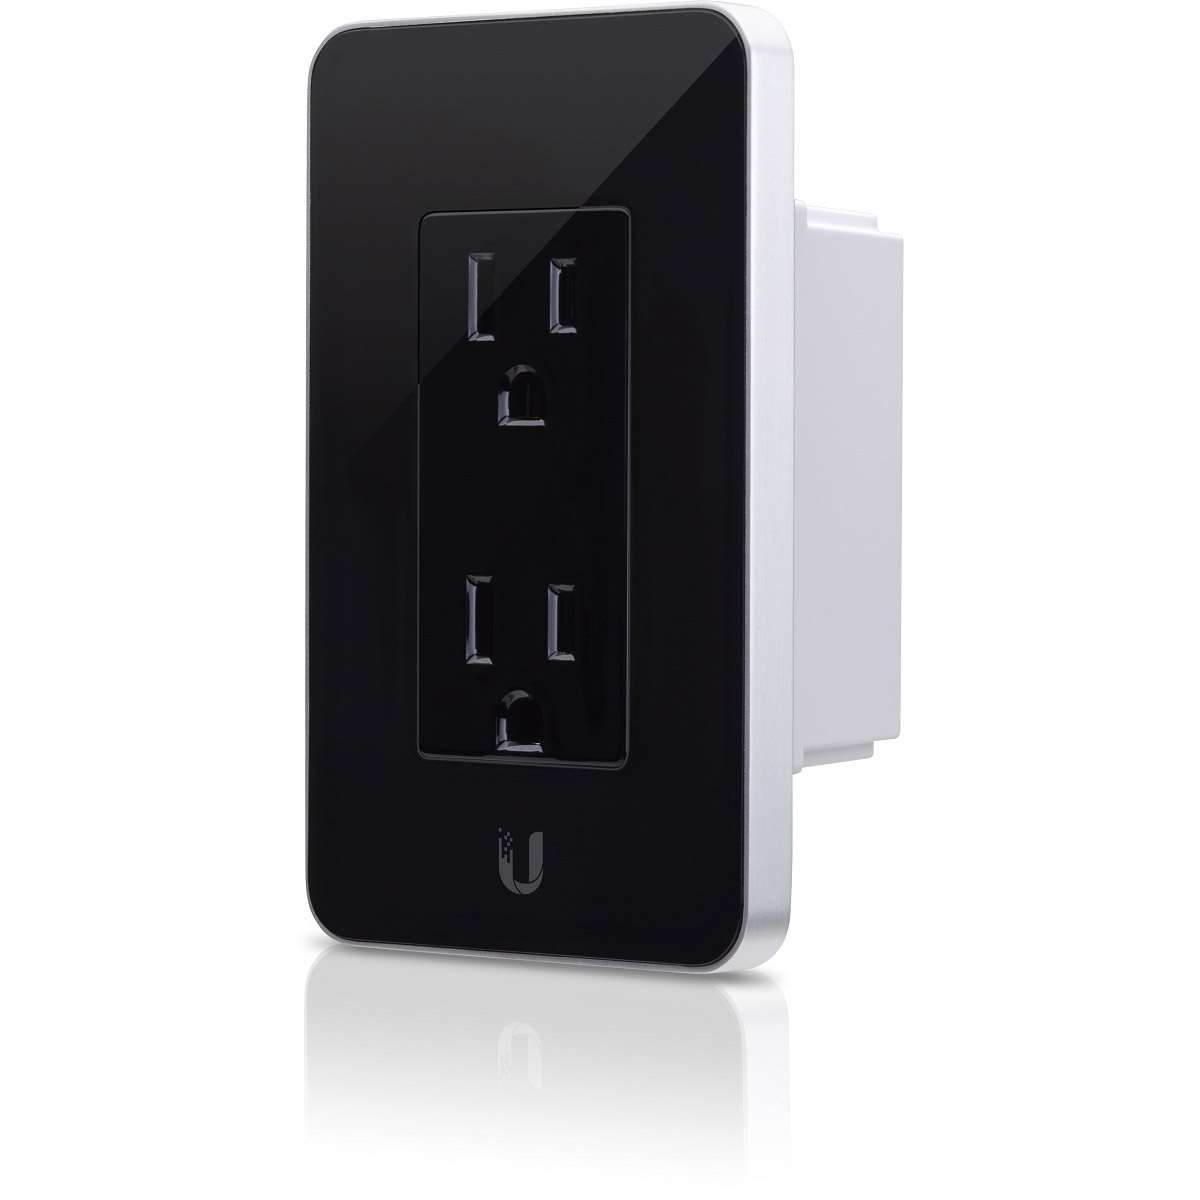 Ubiquiti mFi In-Wall Manageable Devices mFi-MPW